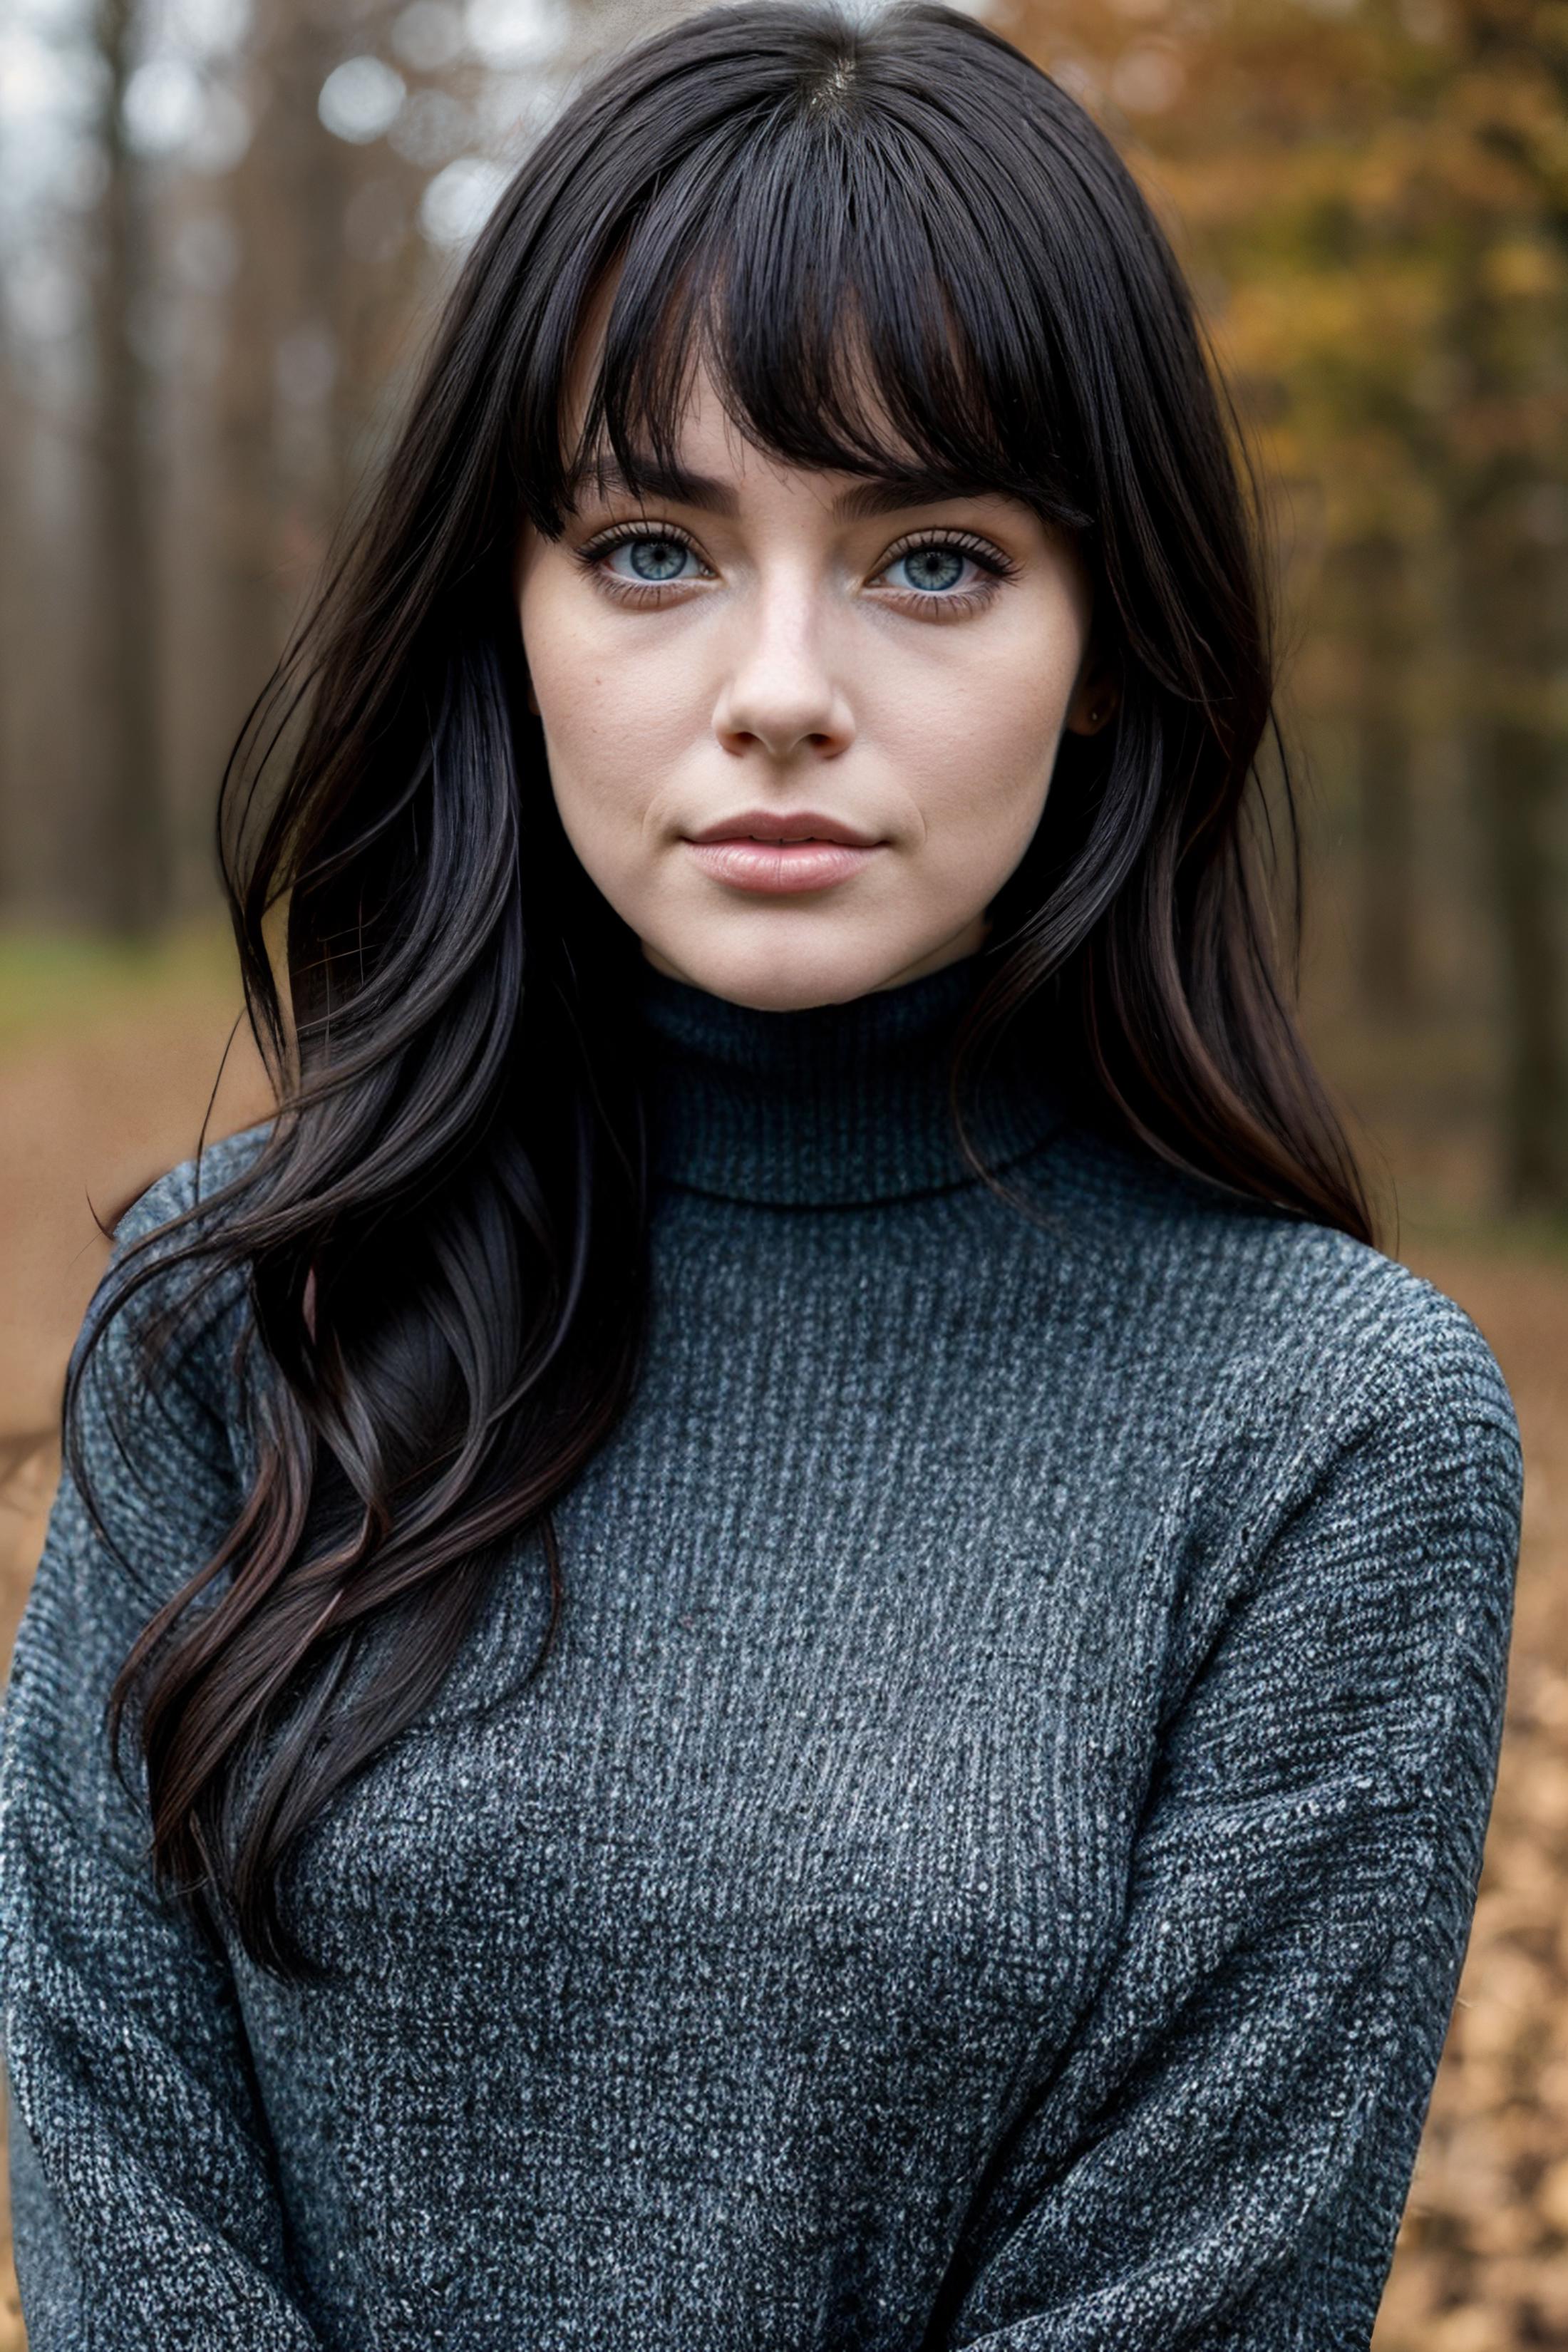 A young woman wearing a grey sweater and black hair.